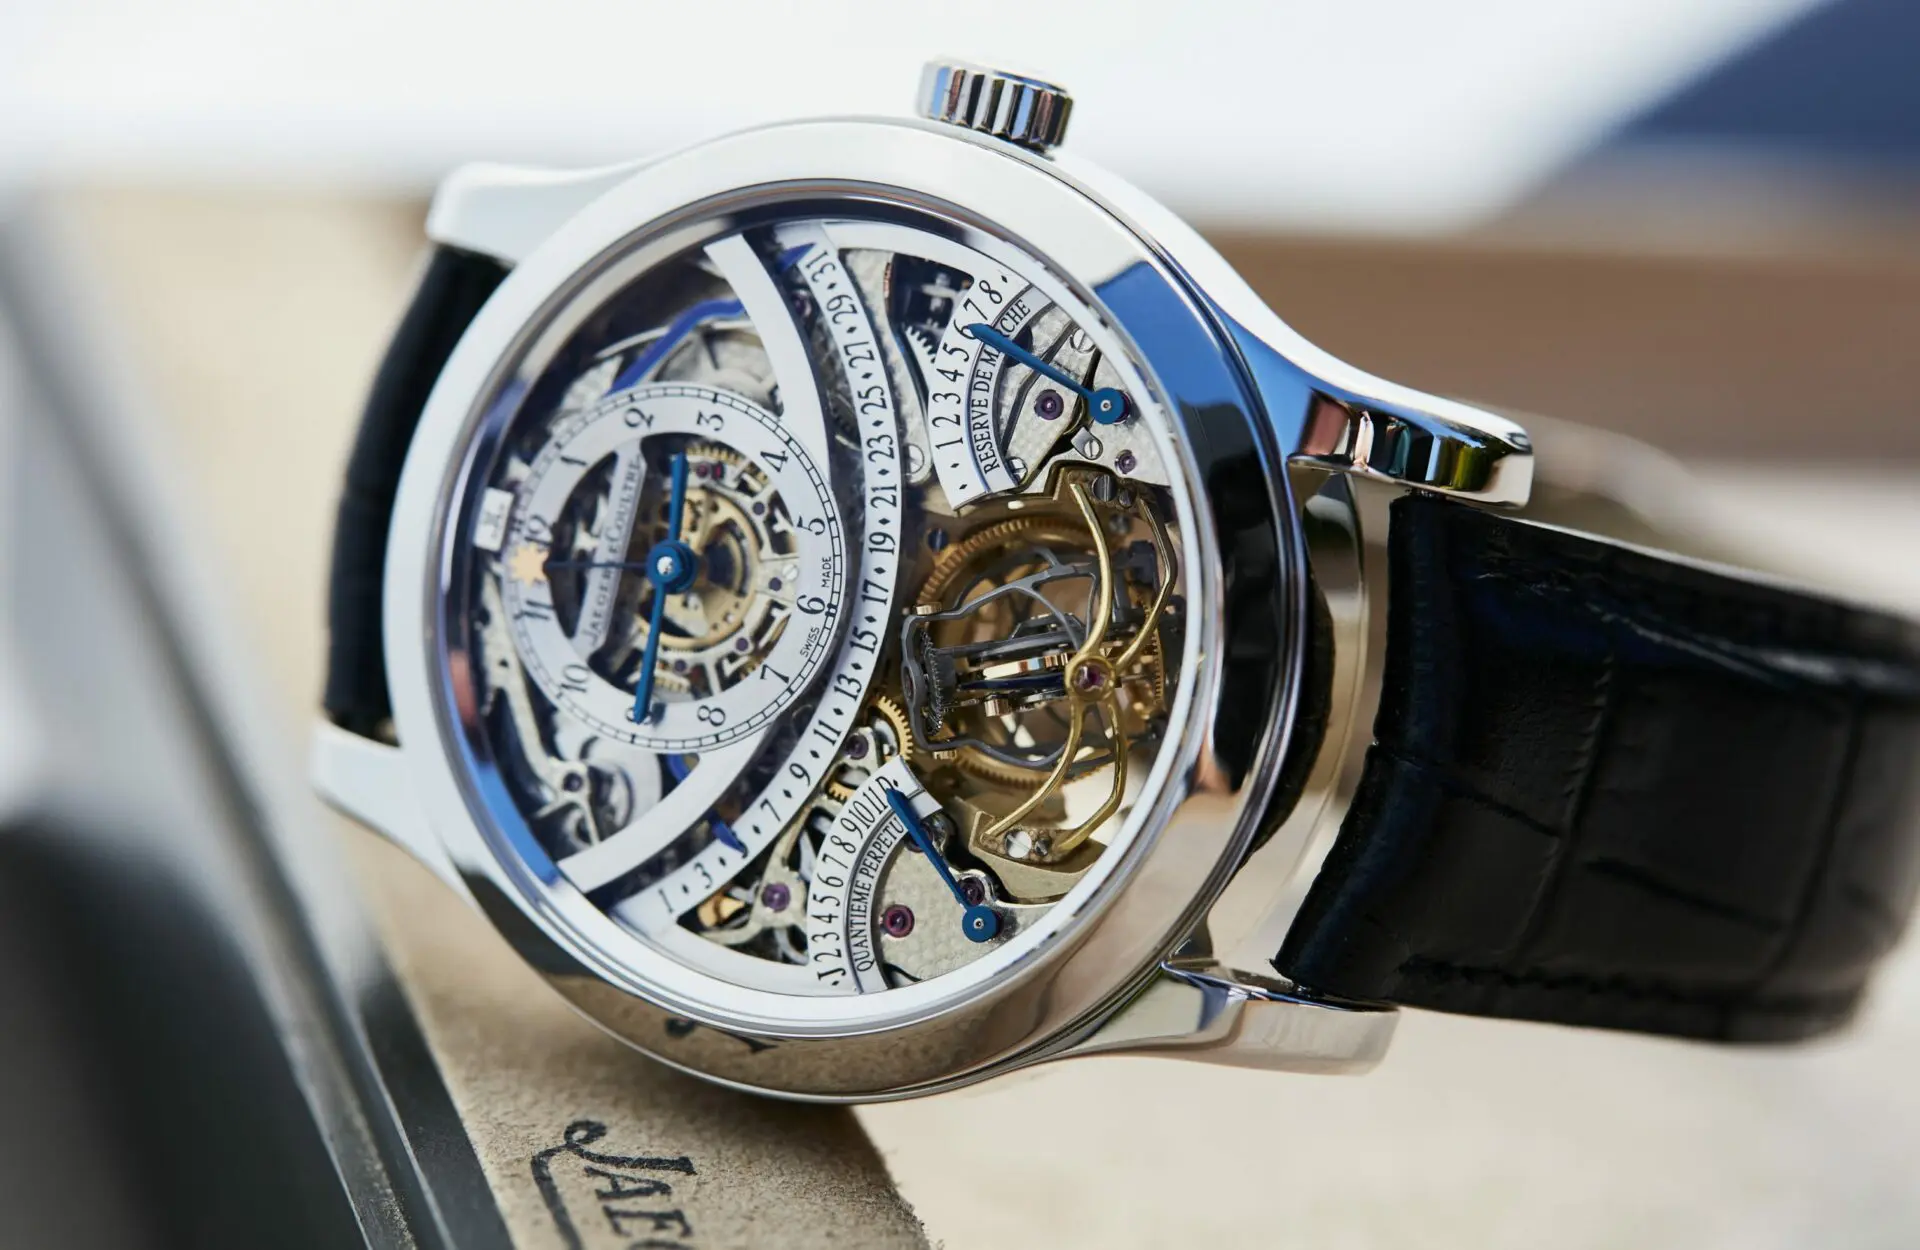 Details more than 151 jaeger lecoultre skeleton watch - songngunhatanh ...